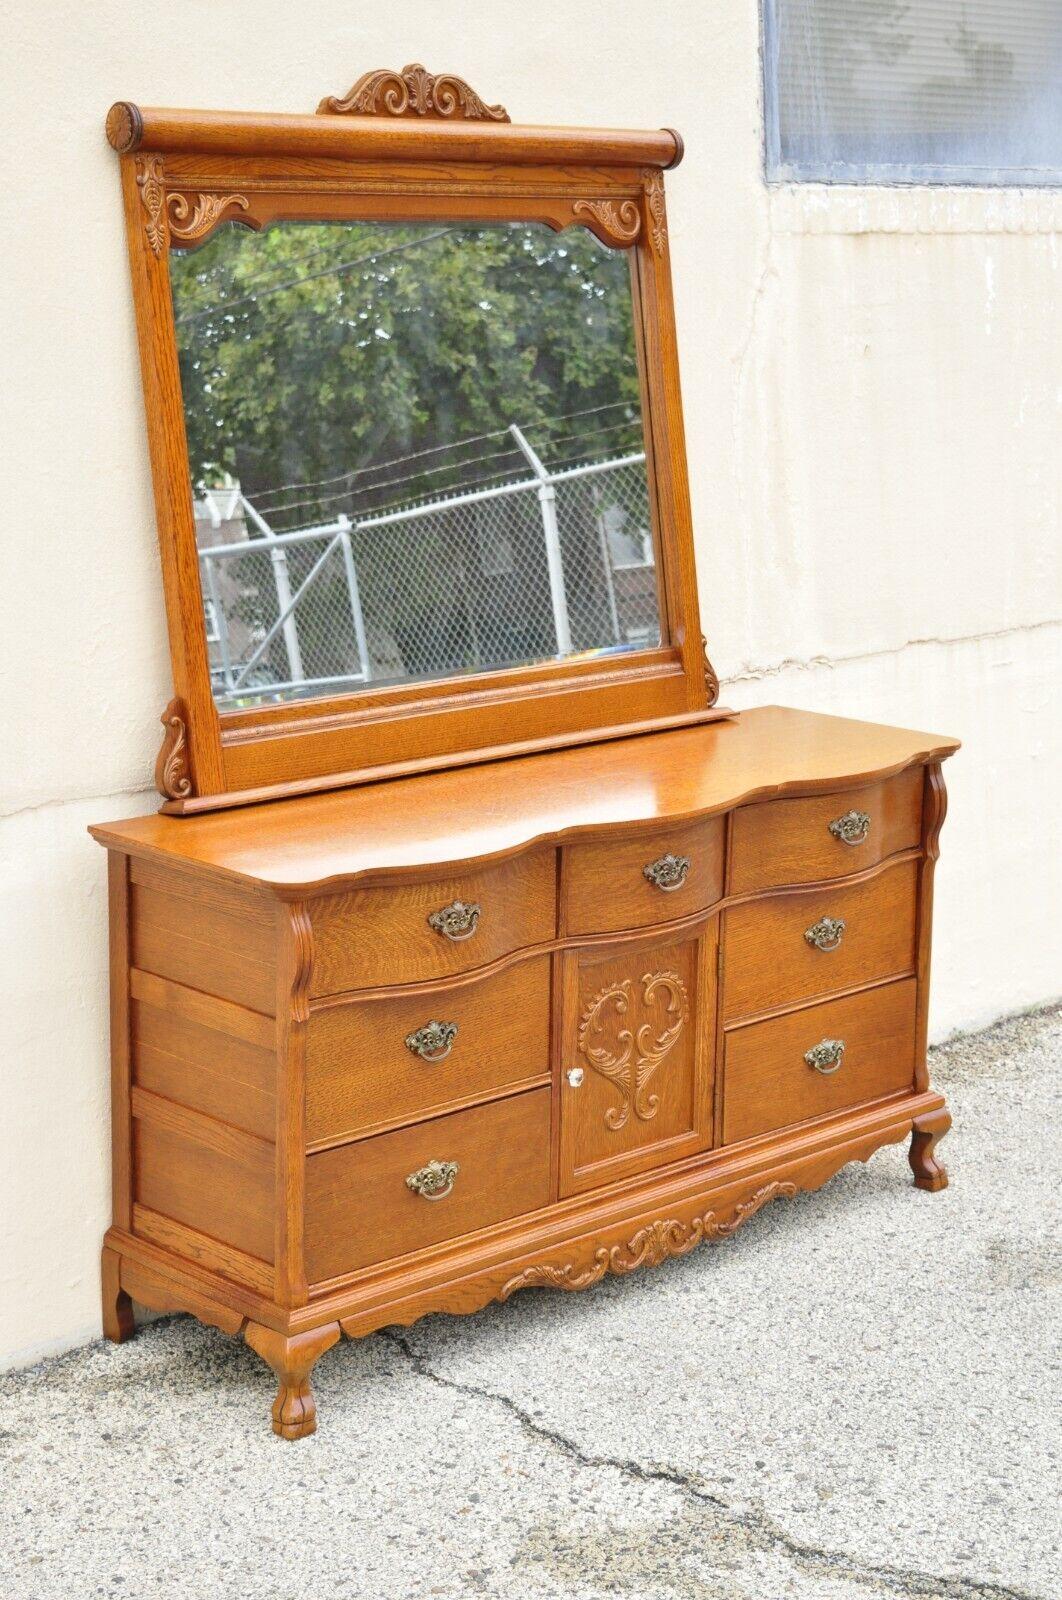 Lexington Victorian sampler oak triple dresser with mirror. Item features paw feet, beautiful wood grain, nicely carved details, 1 swing door, original stamp, 7 dovetailed drawers, quality American craftsmanship, great style and form. Circa Late